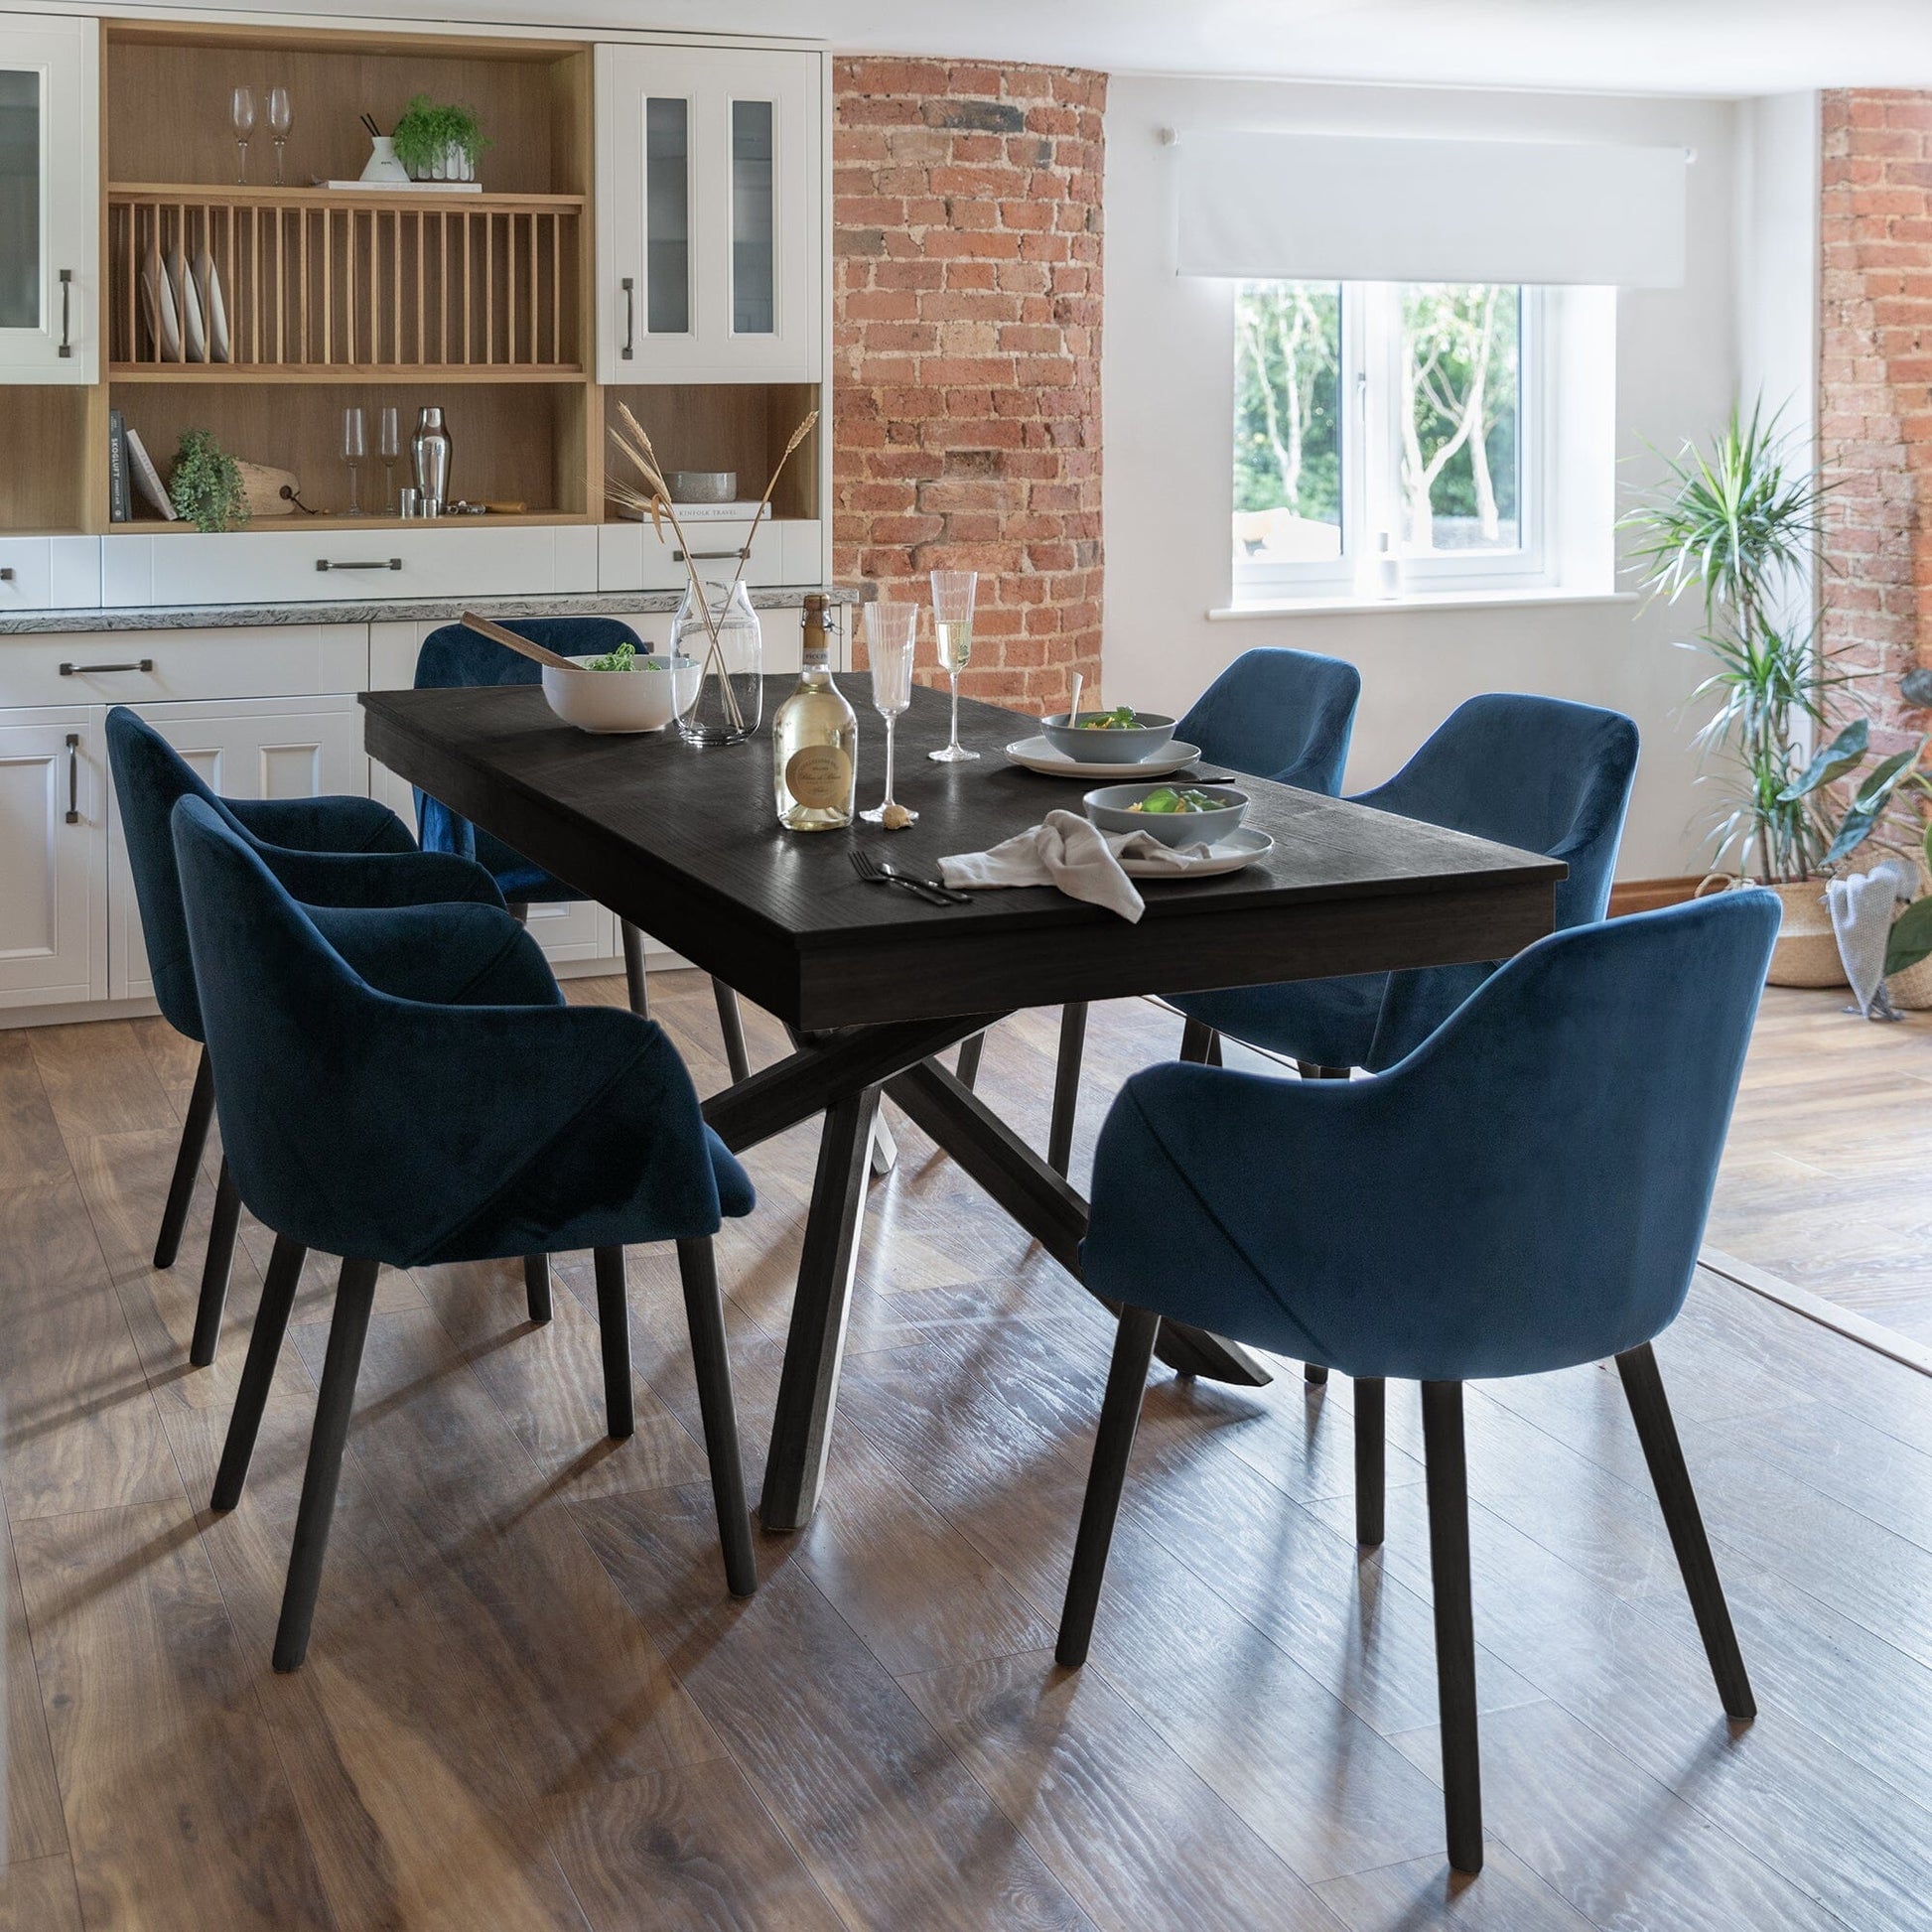 Amelia Black Dining Table Set - 6 Seater - Freya Blue Carver Chairs With Black Legs - Laura James